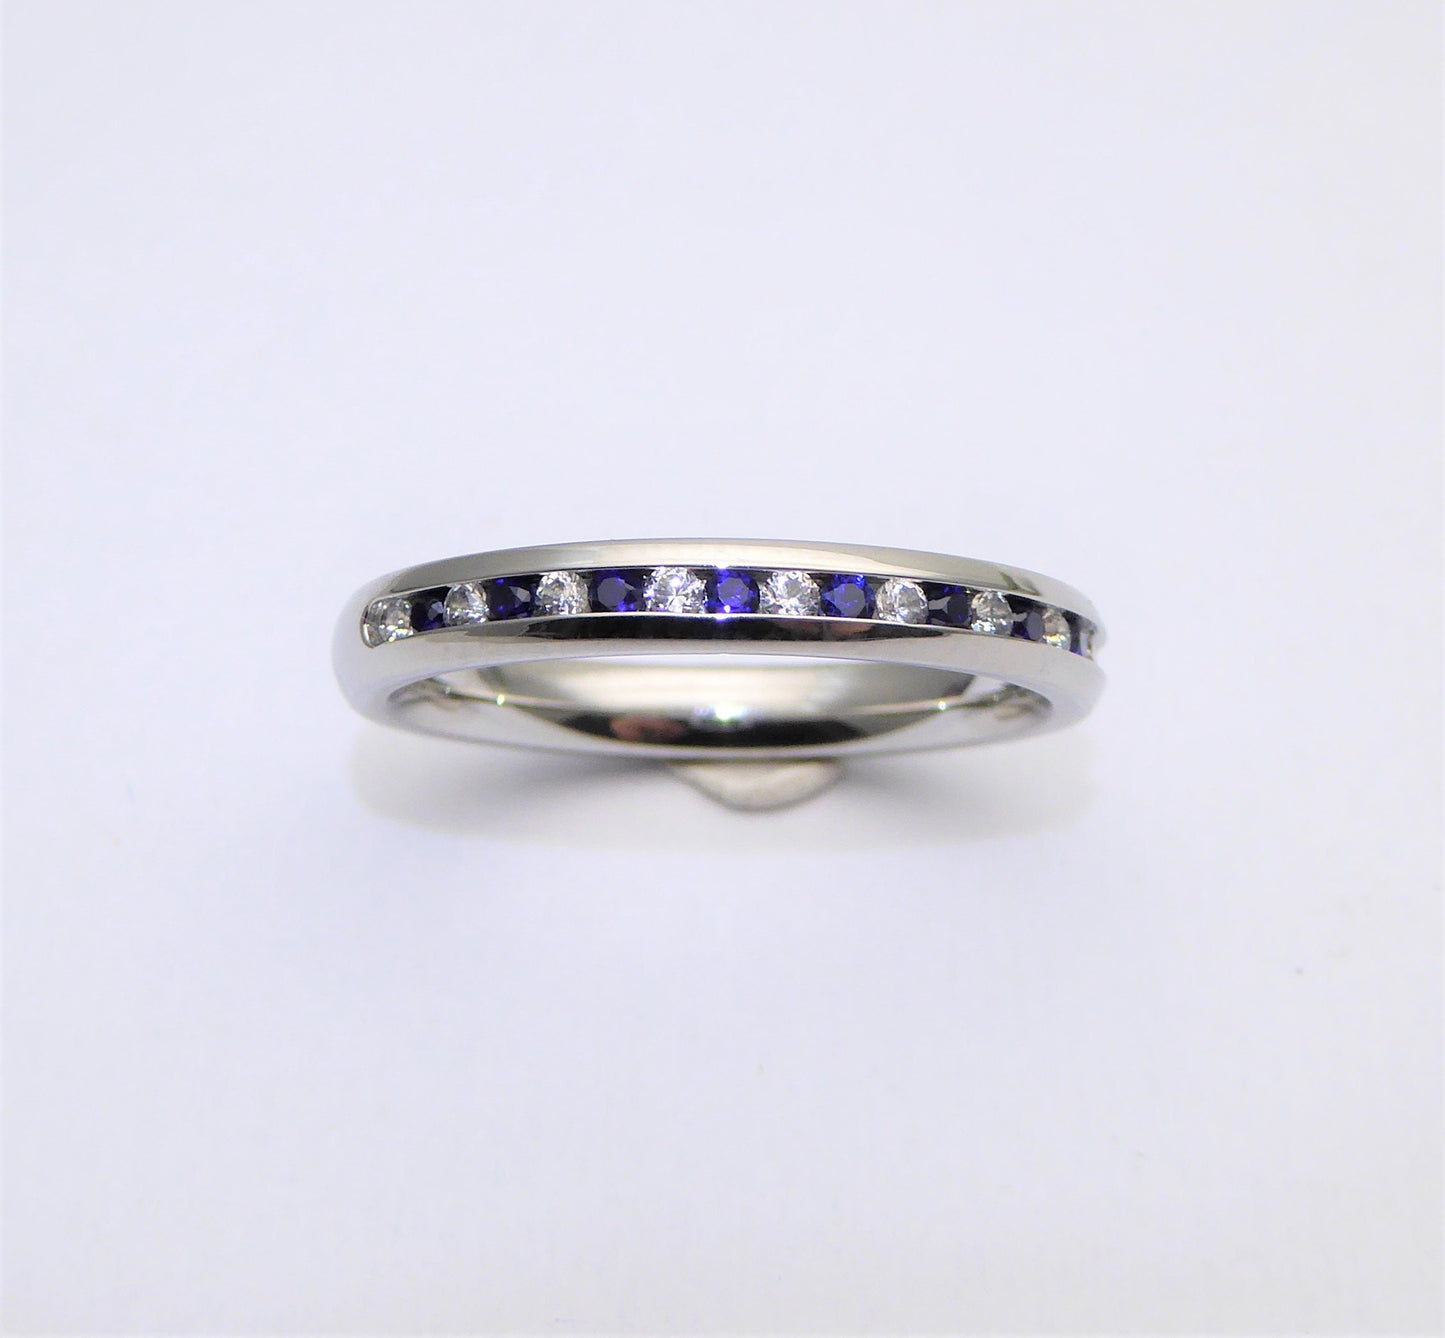 Lab blue & White sapphire 3mm Wide HALF Eternity ring / stacking ring in white gold or titanium - Wedding Band - Engagement ring